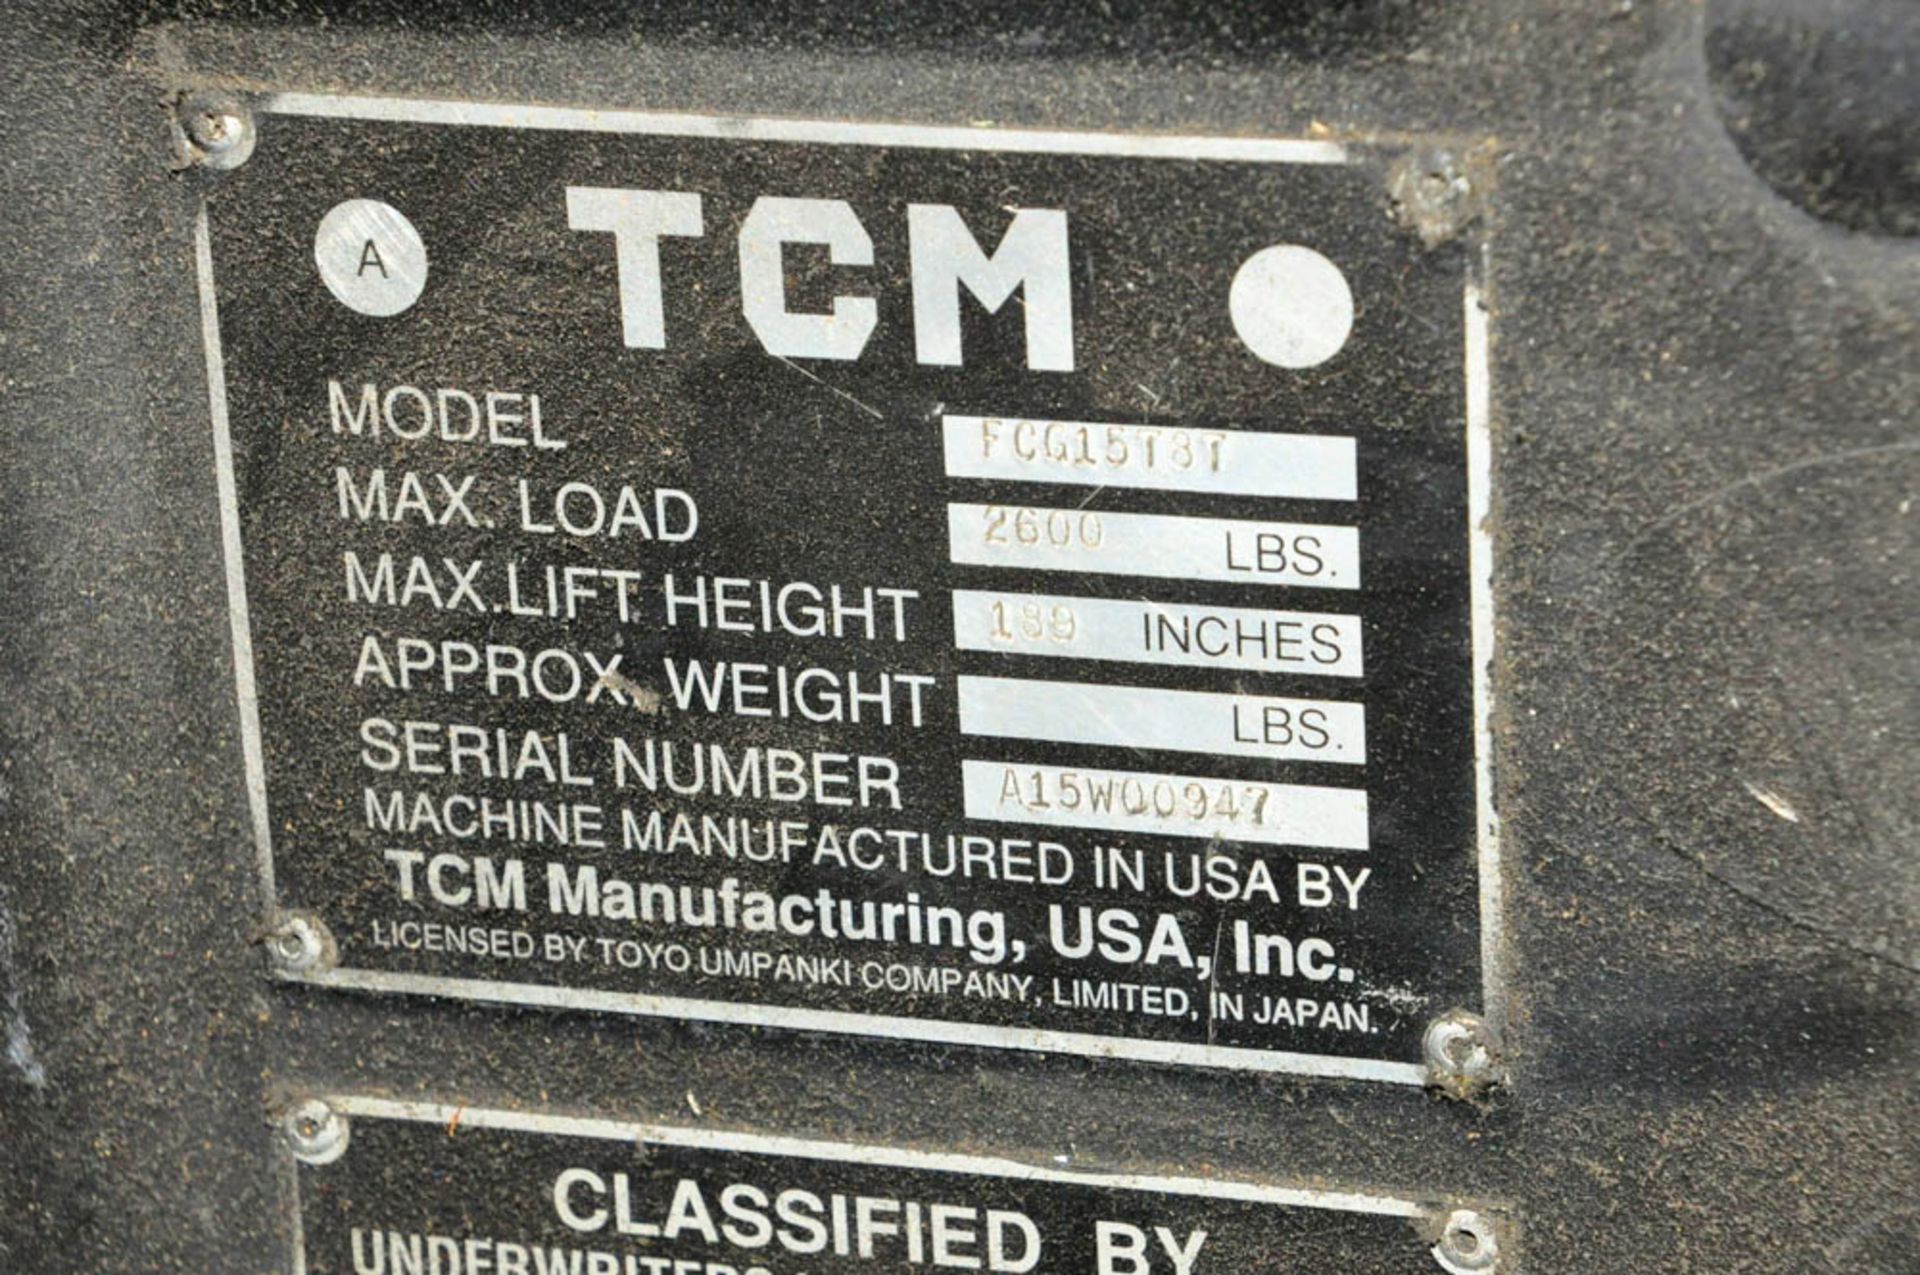 TCM MDL. FCG15T8T, 2600-LBS. X 189" LIFT CAPACITY LP GAS FORK LIFT TRUCK, SIDE SHIFT, 3-STAGE - Image 3 of 3